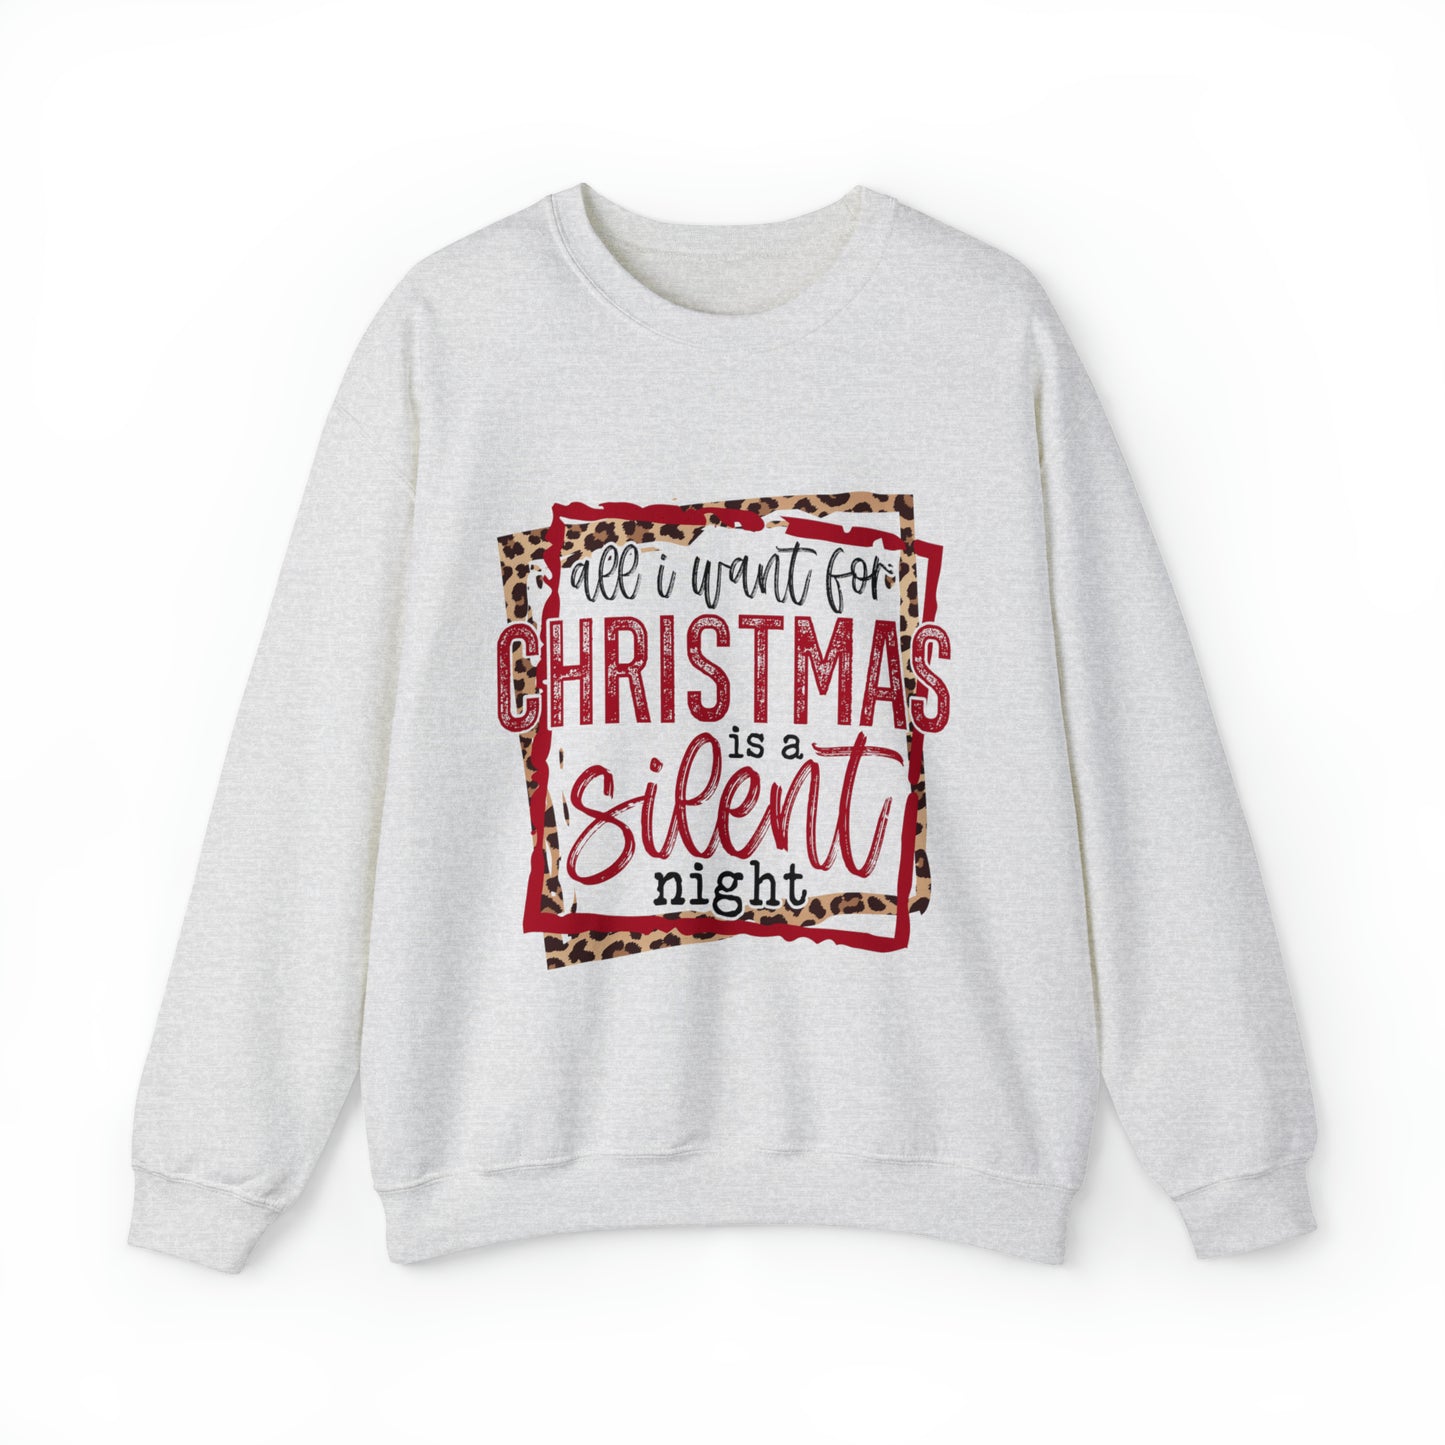 All I Want For Christmas is a Silent Night Women's Christmas Crewneck Sweatshirt